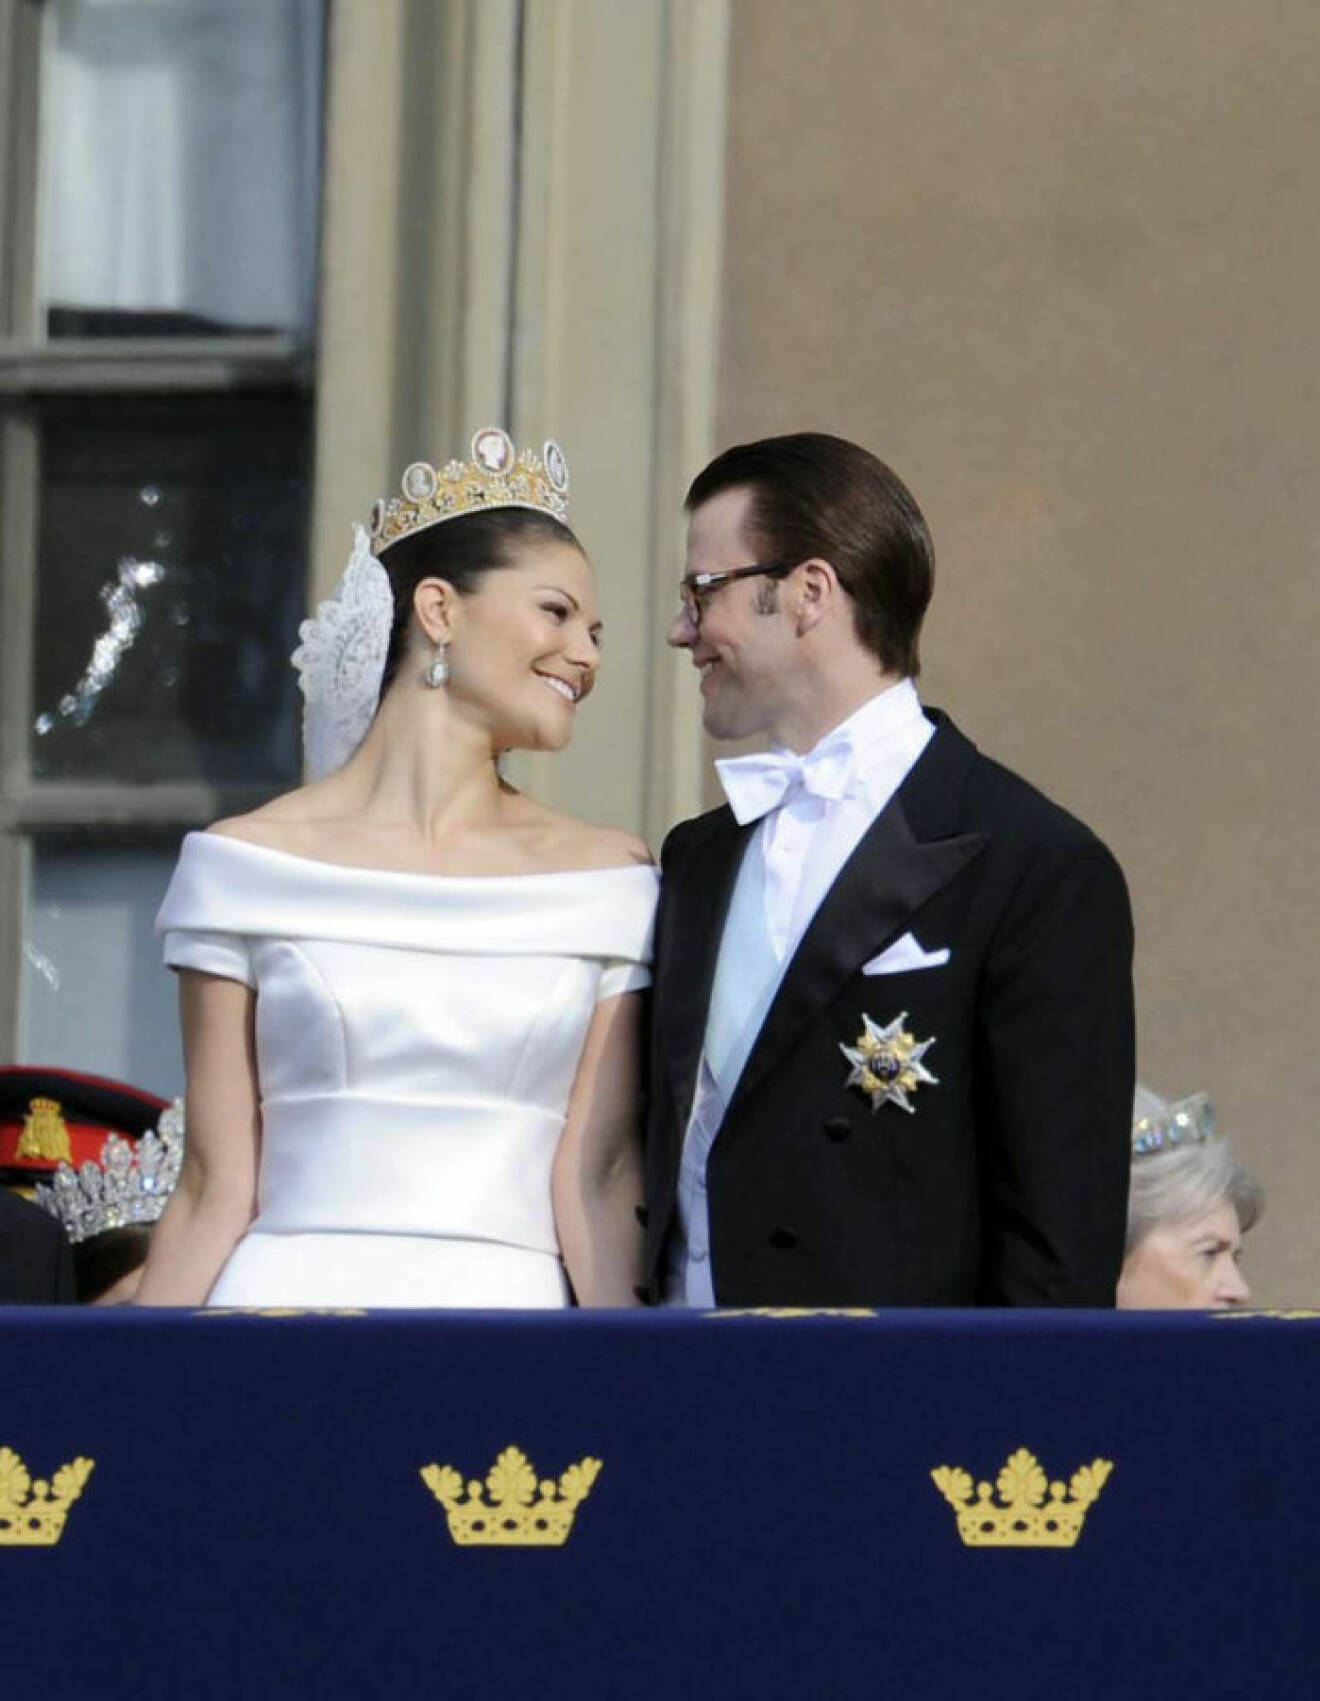 Stockholm, 2010-6-19 / Sweden's future queen Crown Princess VICTORIA has married her former personal trainer DANIEL WESTLING in a lavish ceremony that was one of the largest public celebrations ever organised in Stockholm. It was Europe's biggest wedding since Lady Diana Spencer married Prince Charles. Crown Princess Victoria's wedding dress was designed by P??r Engsheden. It is made of cream-coloured duchess silk satin, with short sleeves and a turned-out collar, which follows the rounded neckline. The dress has a v-shaped back with covered buttons. The sash at the waist is buttoned up at the back. The train is edged with a border, fastened at the waist, and has the same shape as the veil. The train is almost five metres long. The Crown Princess?s bridal bouquet consists of a mixture of traditional Swedish summer flowers and more exotic flowers. All the flowers are white, and the bouquet is tied into a free teardrop shape. ?? Copyright 2010, Most Wanted Pictures, Inc. | Tarzana | CA 91356 | USA | photo@mostwantedpictures.net *** Local Caption *** 00296335